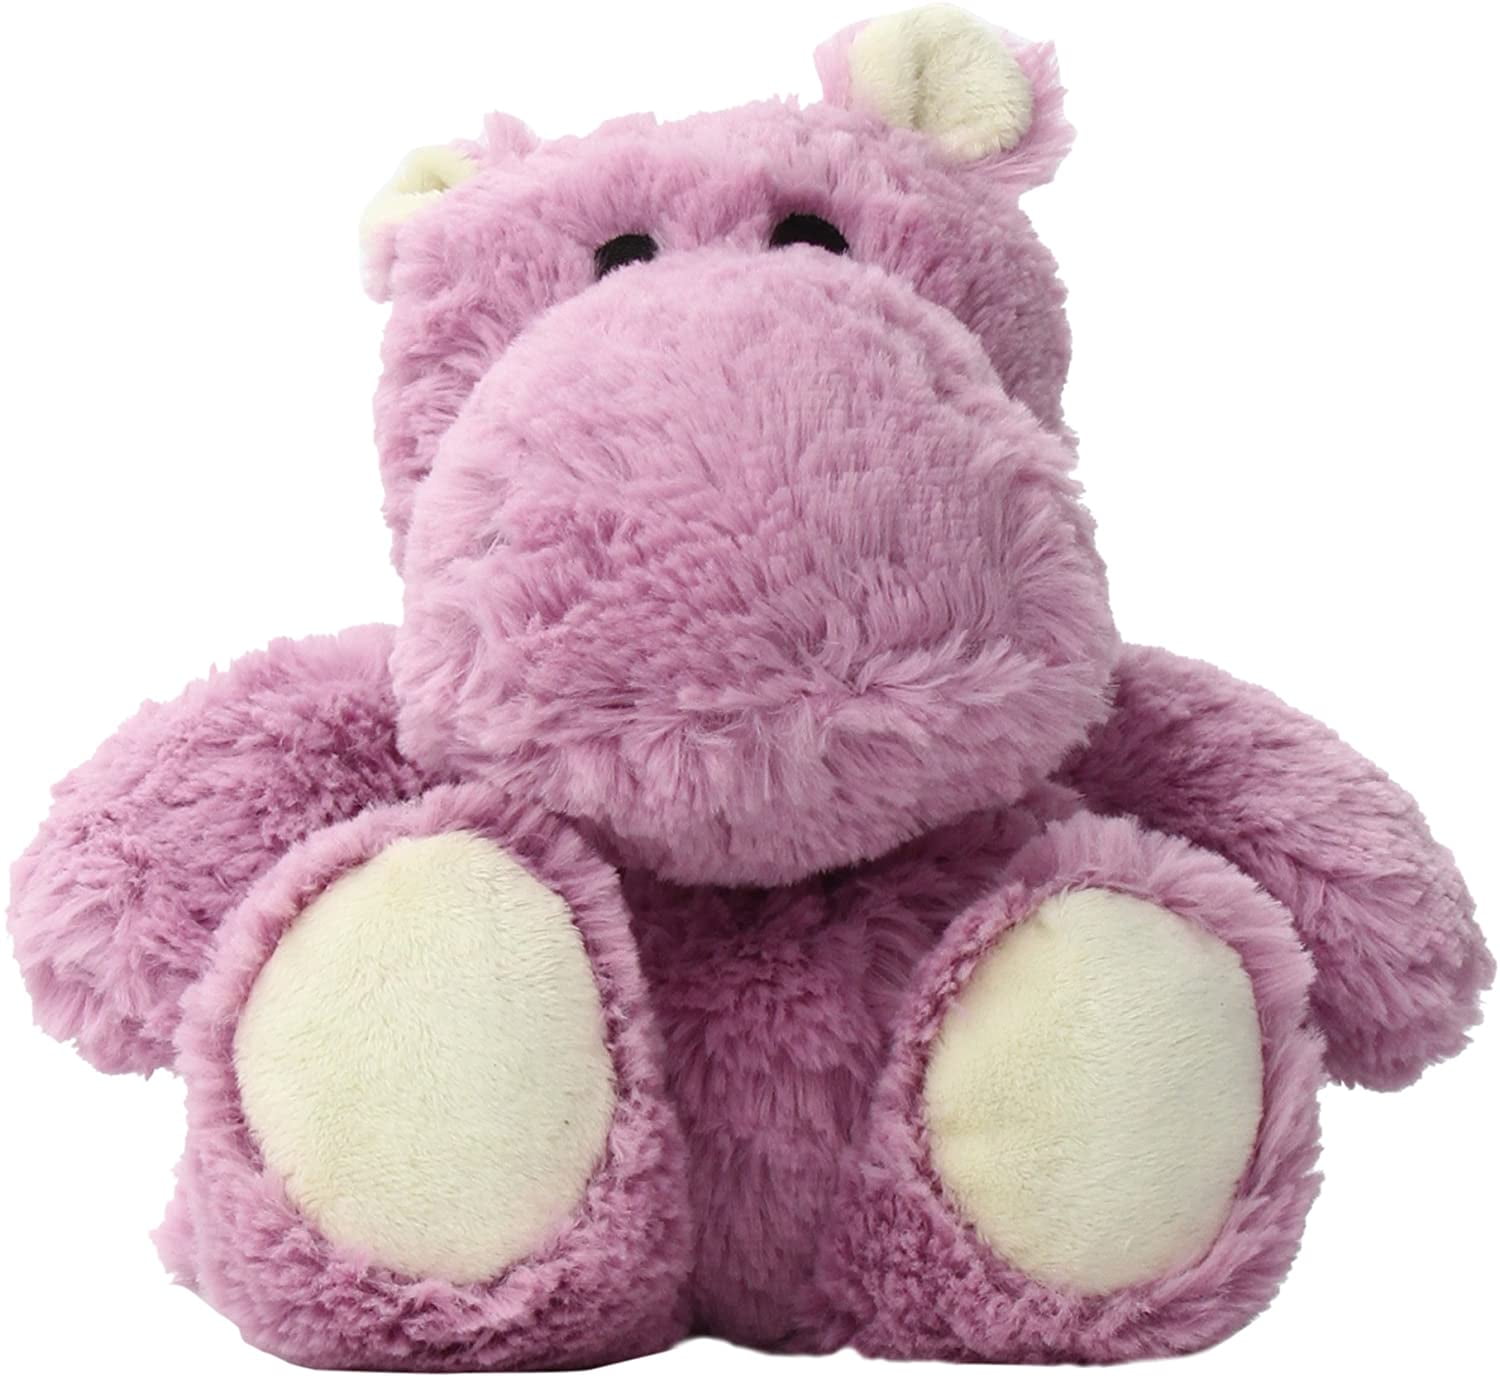 Warmies Microwavable French Lavender Scented 20" Plush Neck Wrap Hippo 